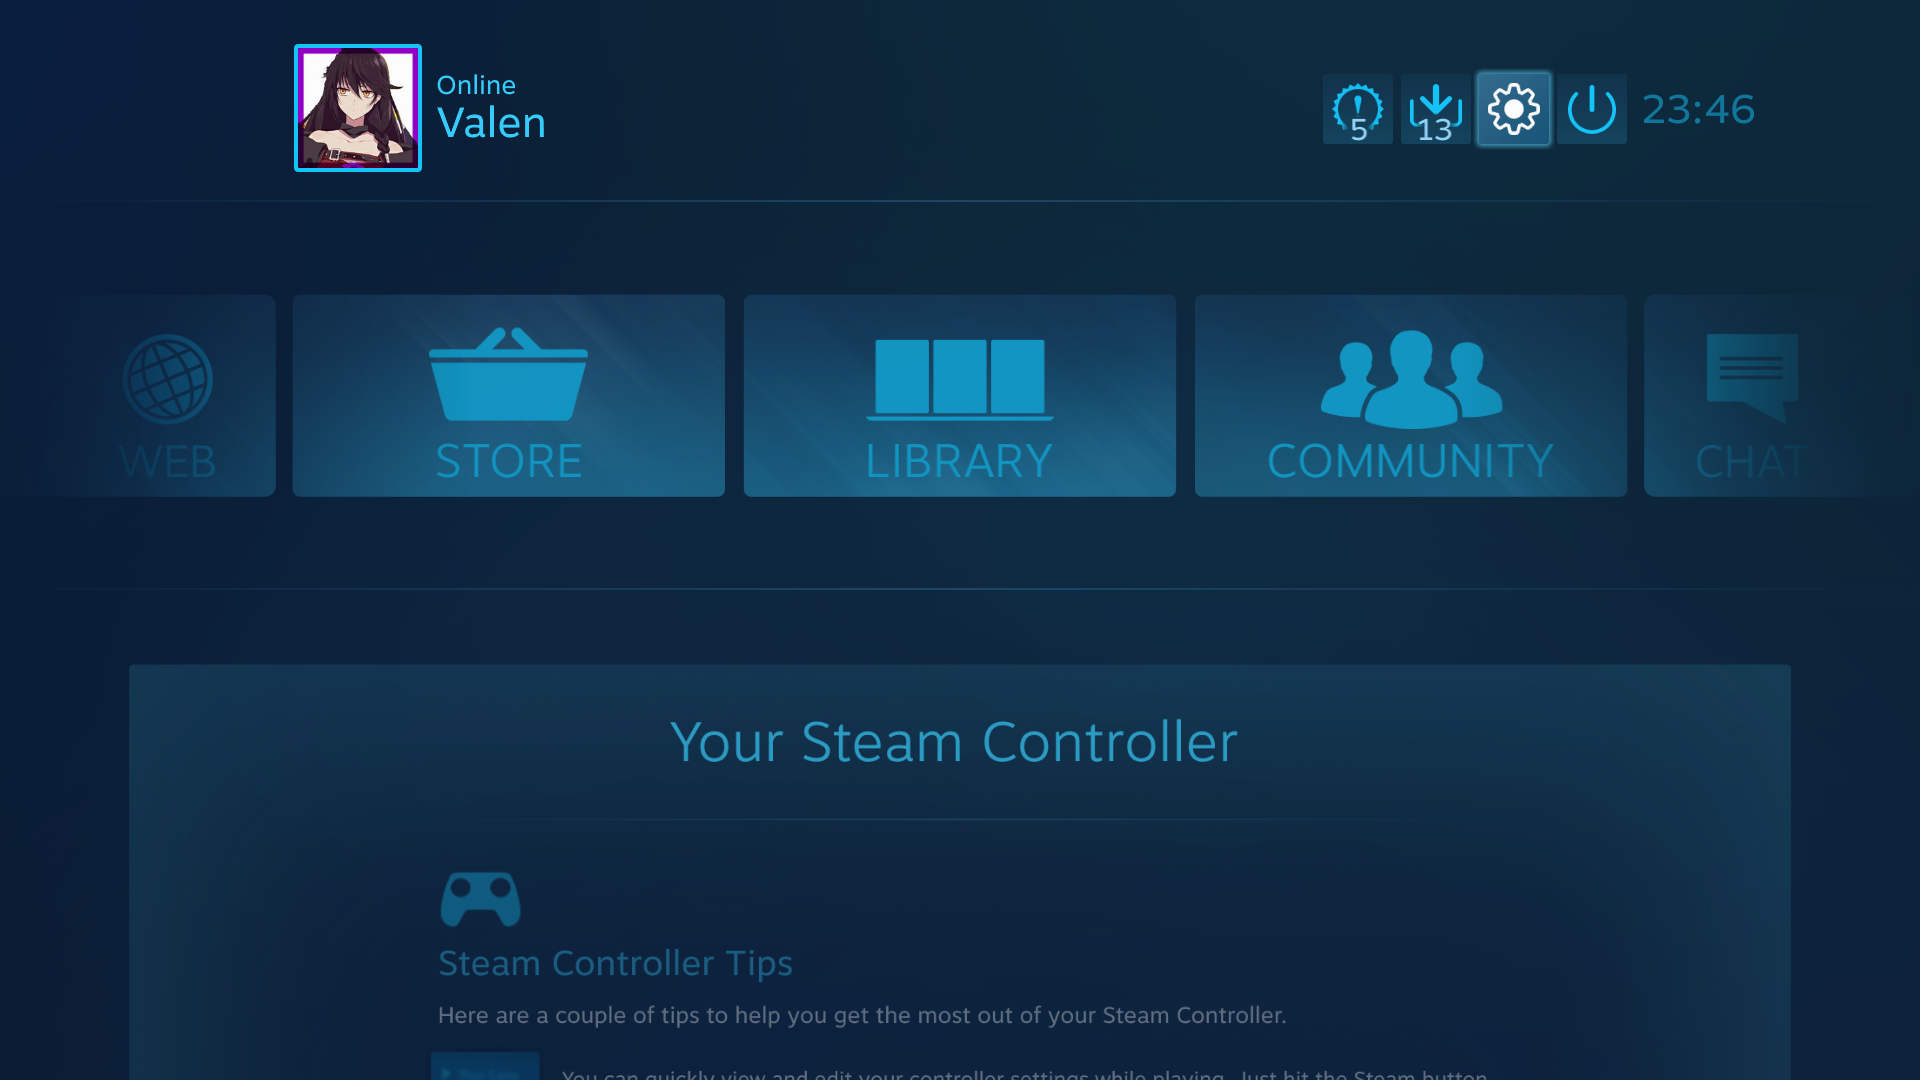 Steam Community :: Guide :: Fixing Controller Support in Dead